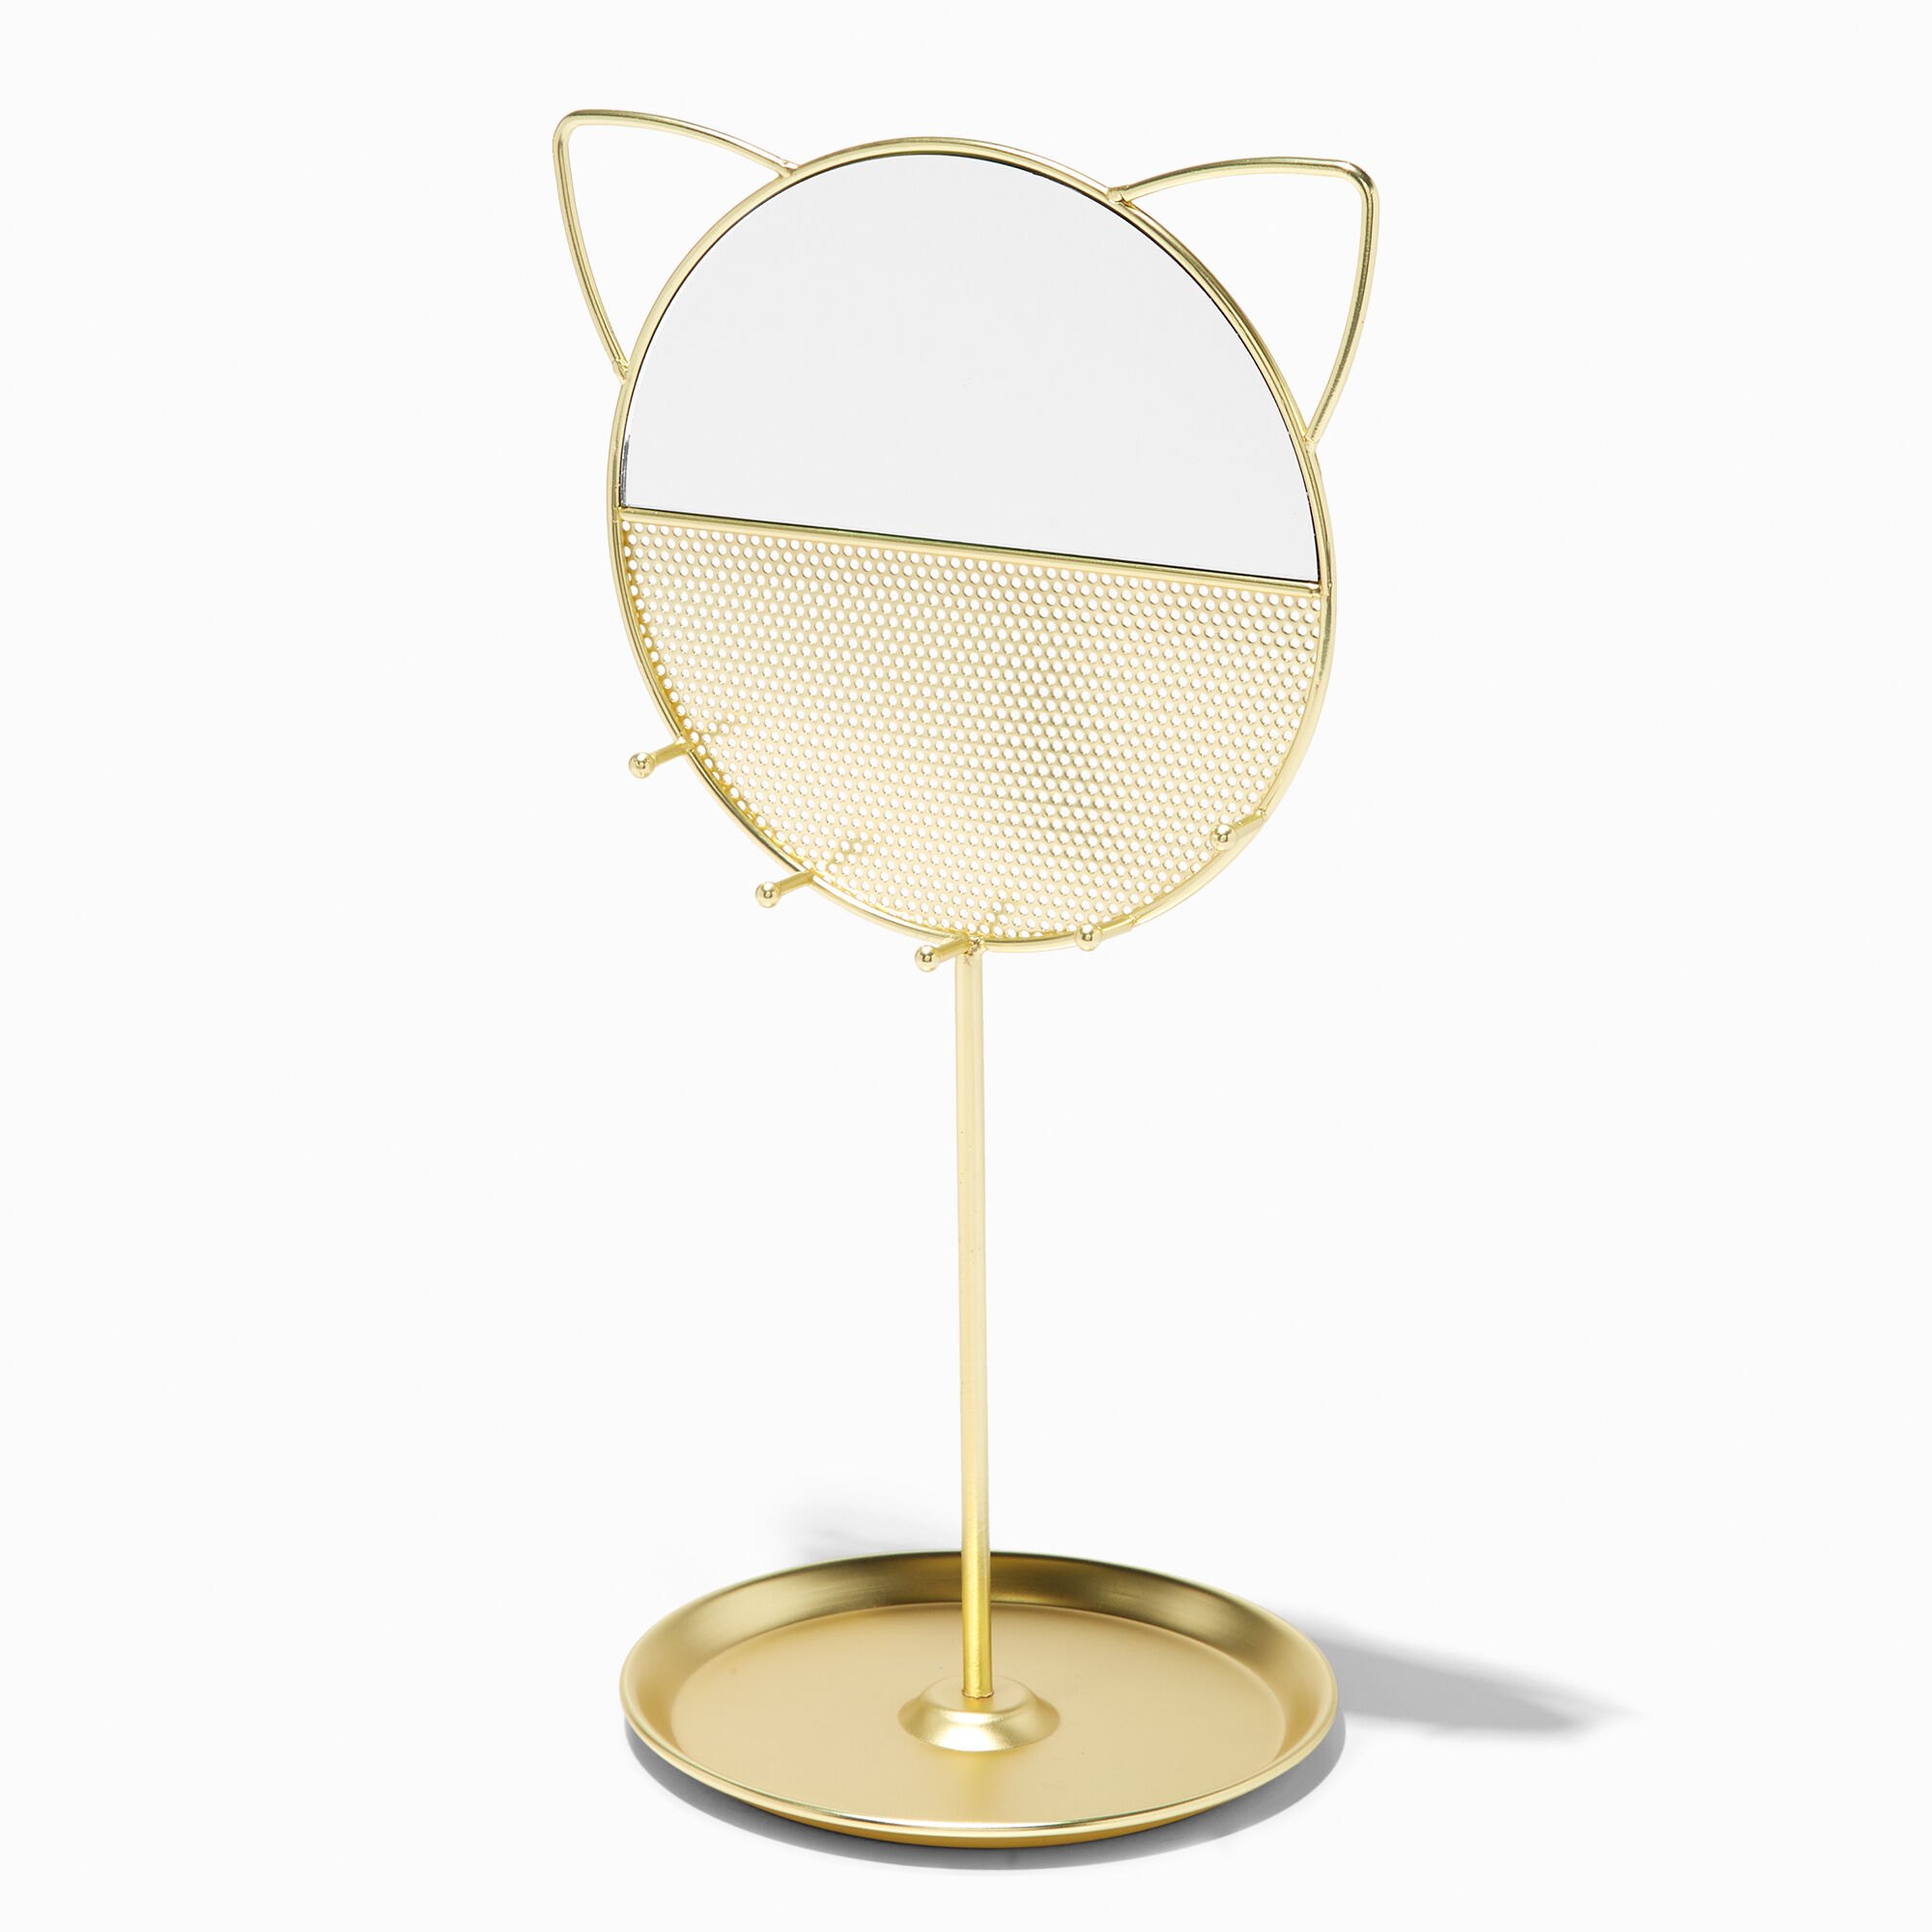 View Claires Cat Mirror Standing Jewelry Holder Bracelet Gold information